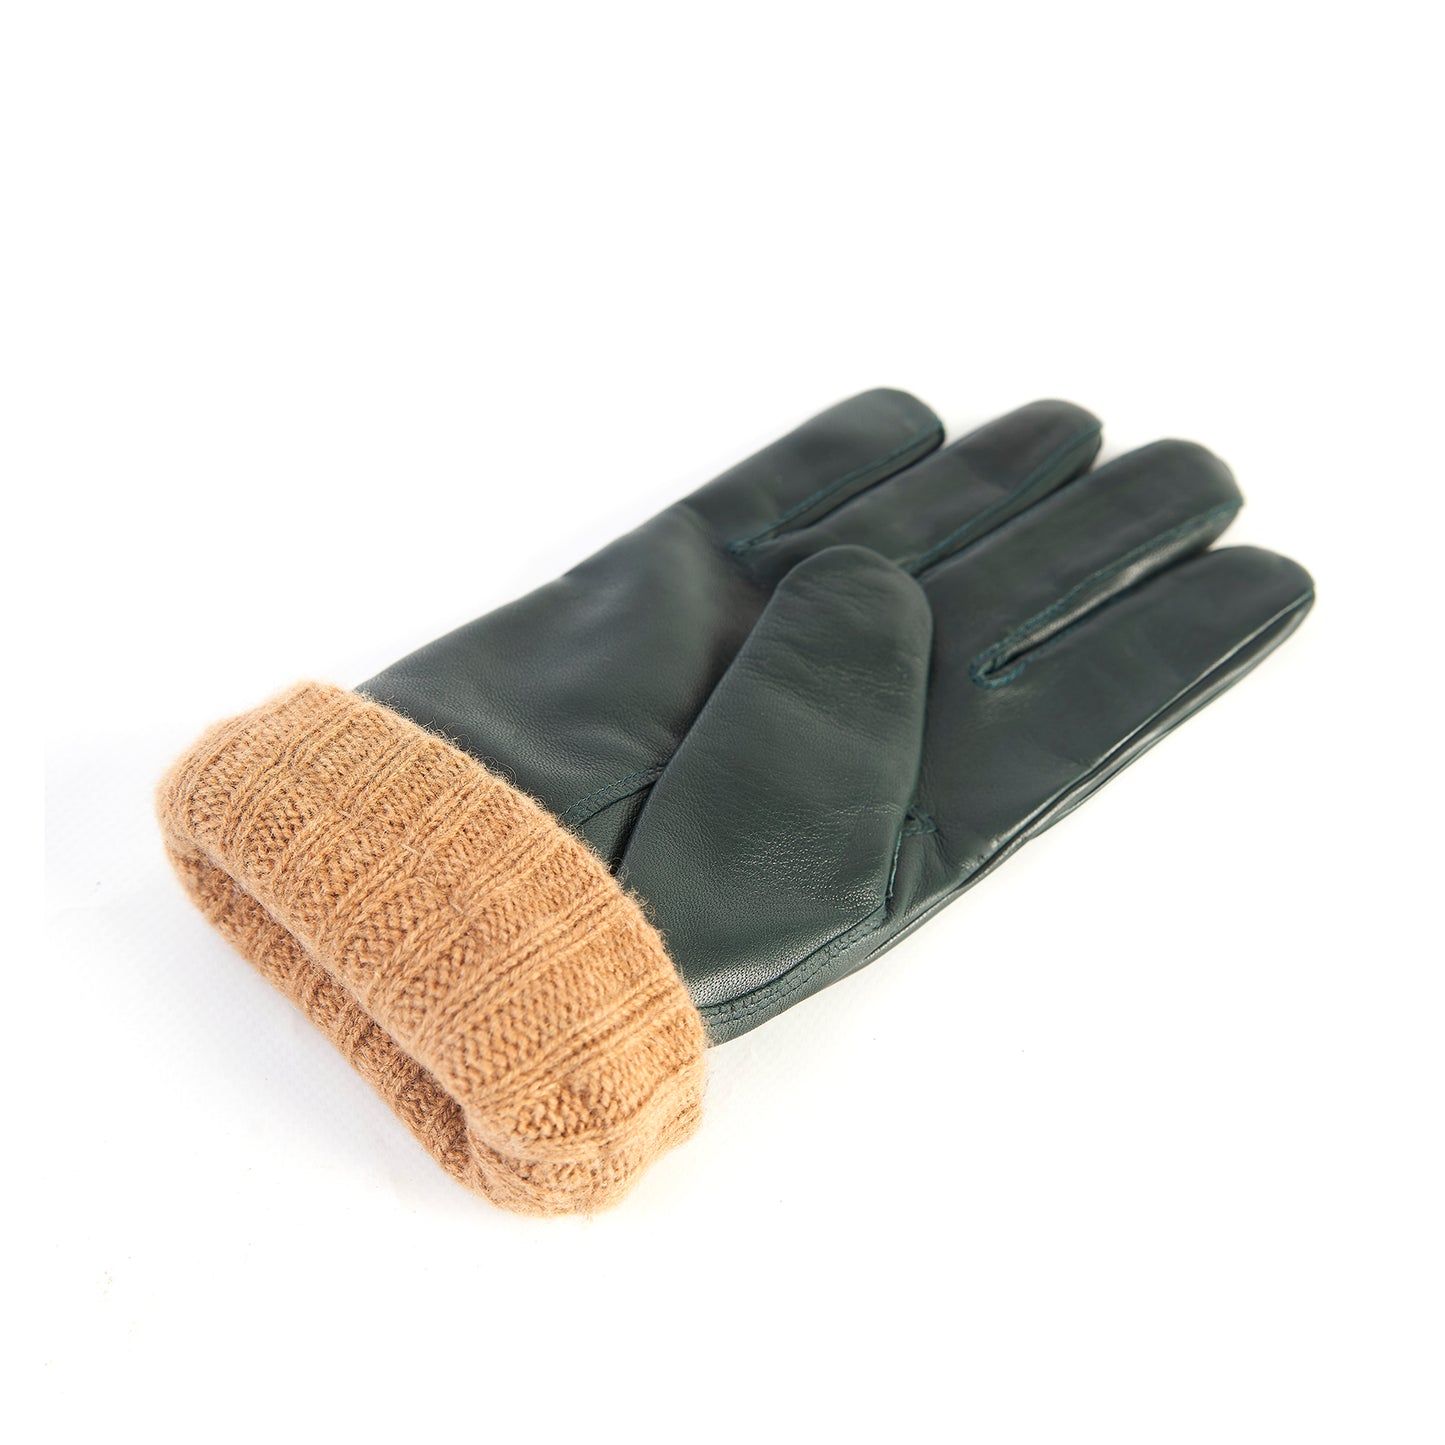 Men's green nappa leather gloves with coloured cashmere lining and cuff